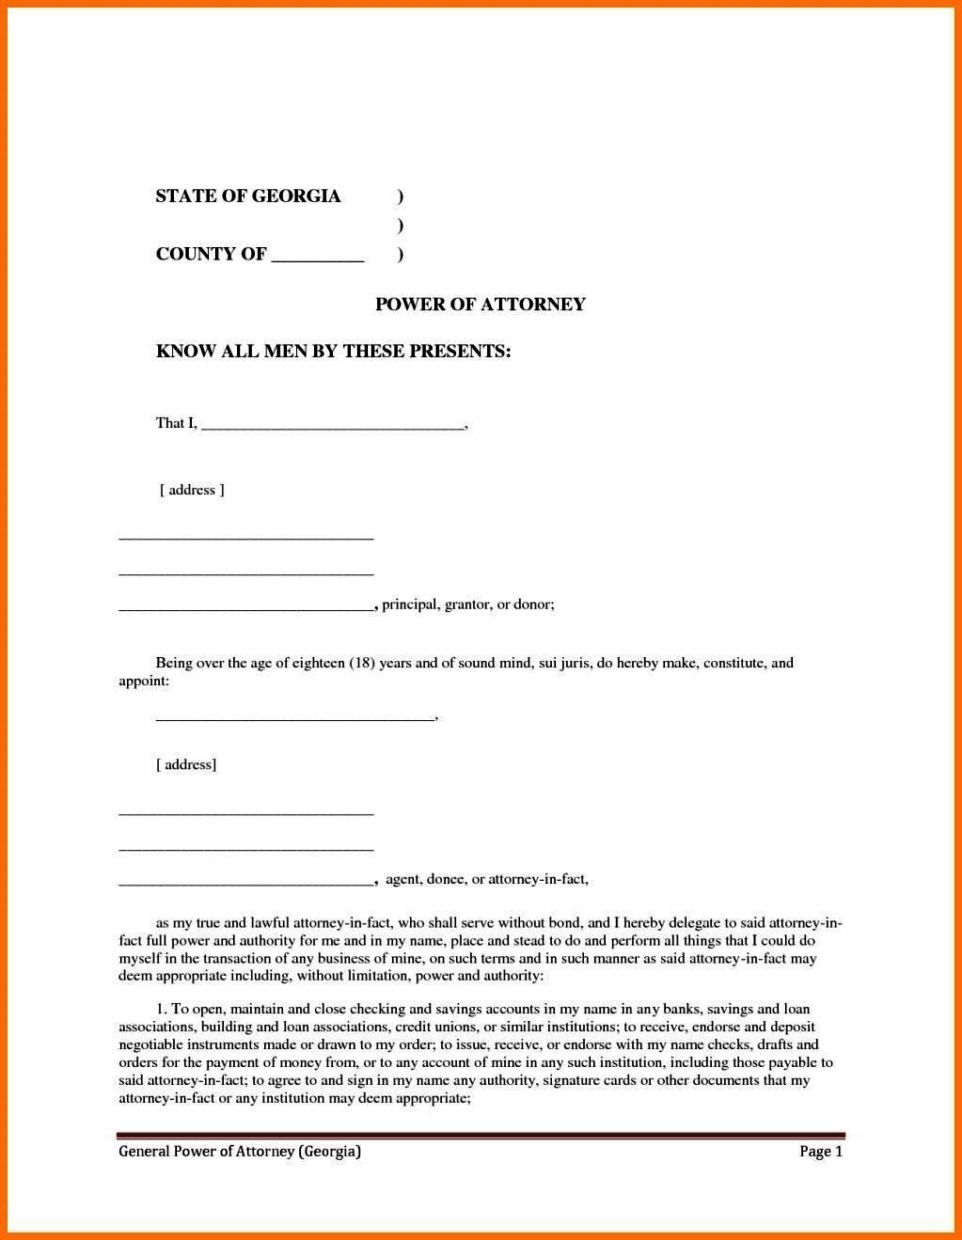 free-printable-blank-power-of-attorney-form-printable-forms-free-online